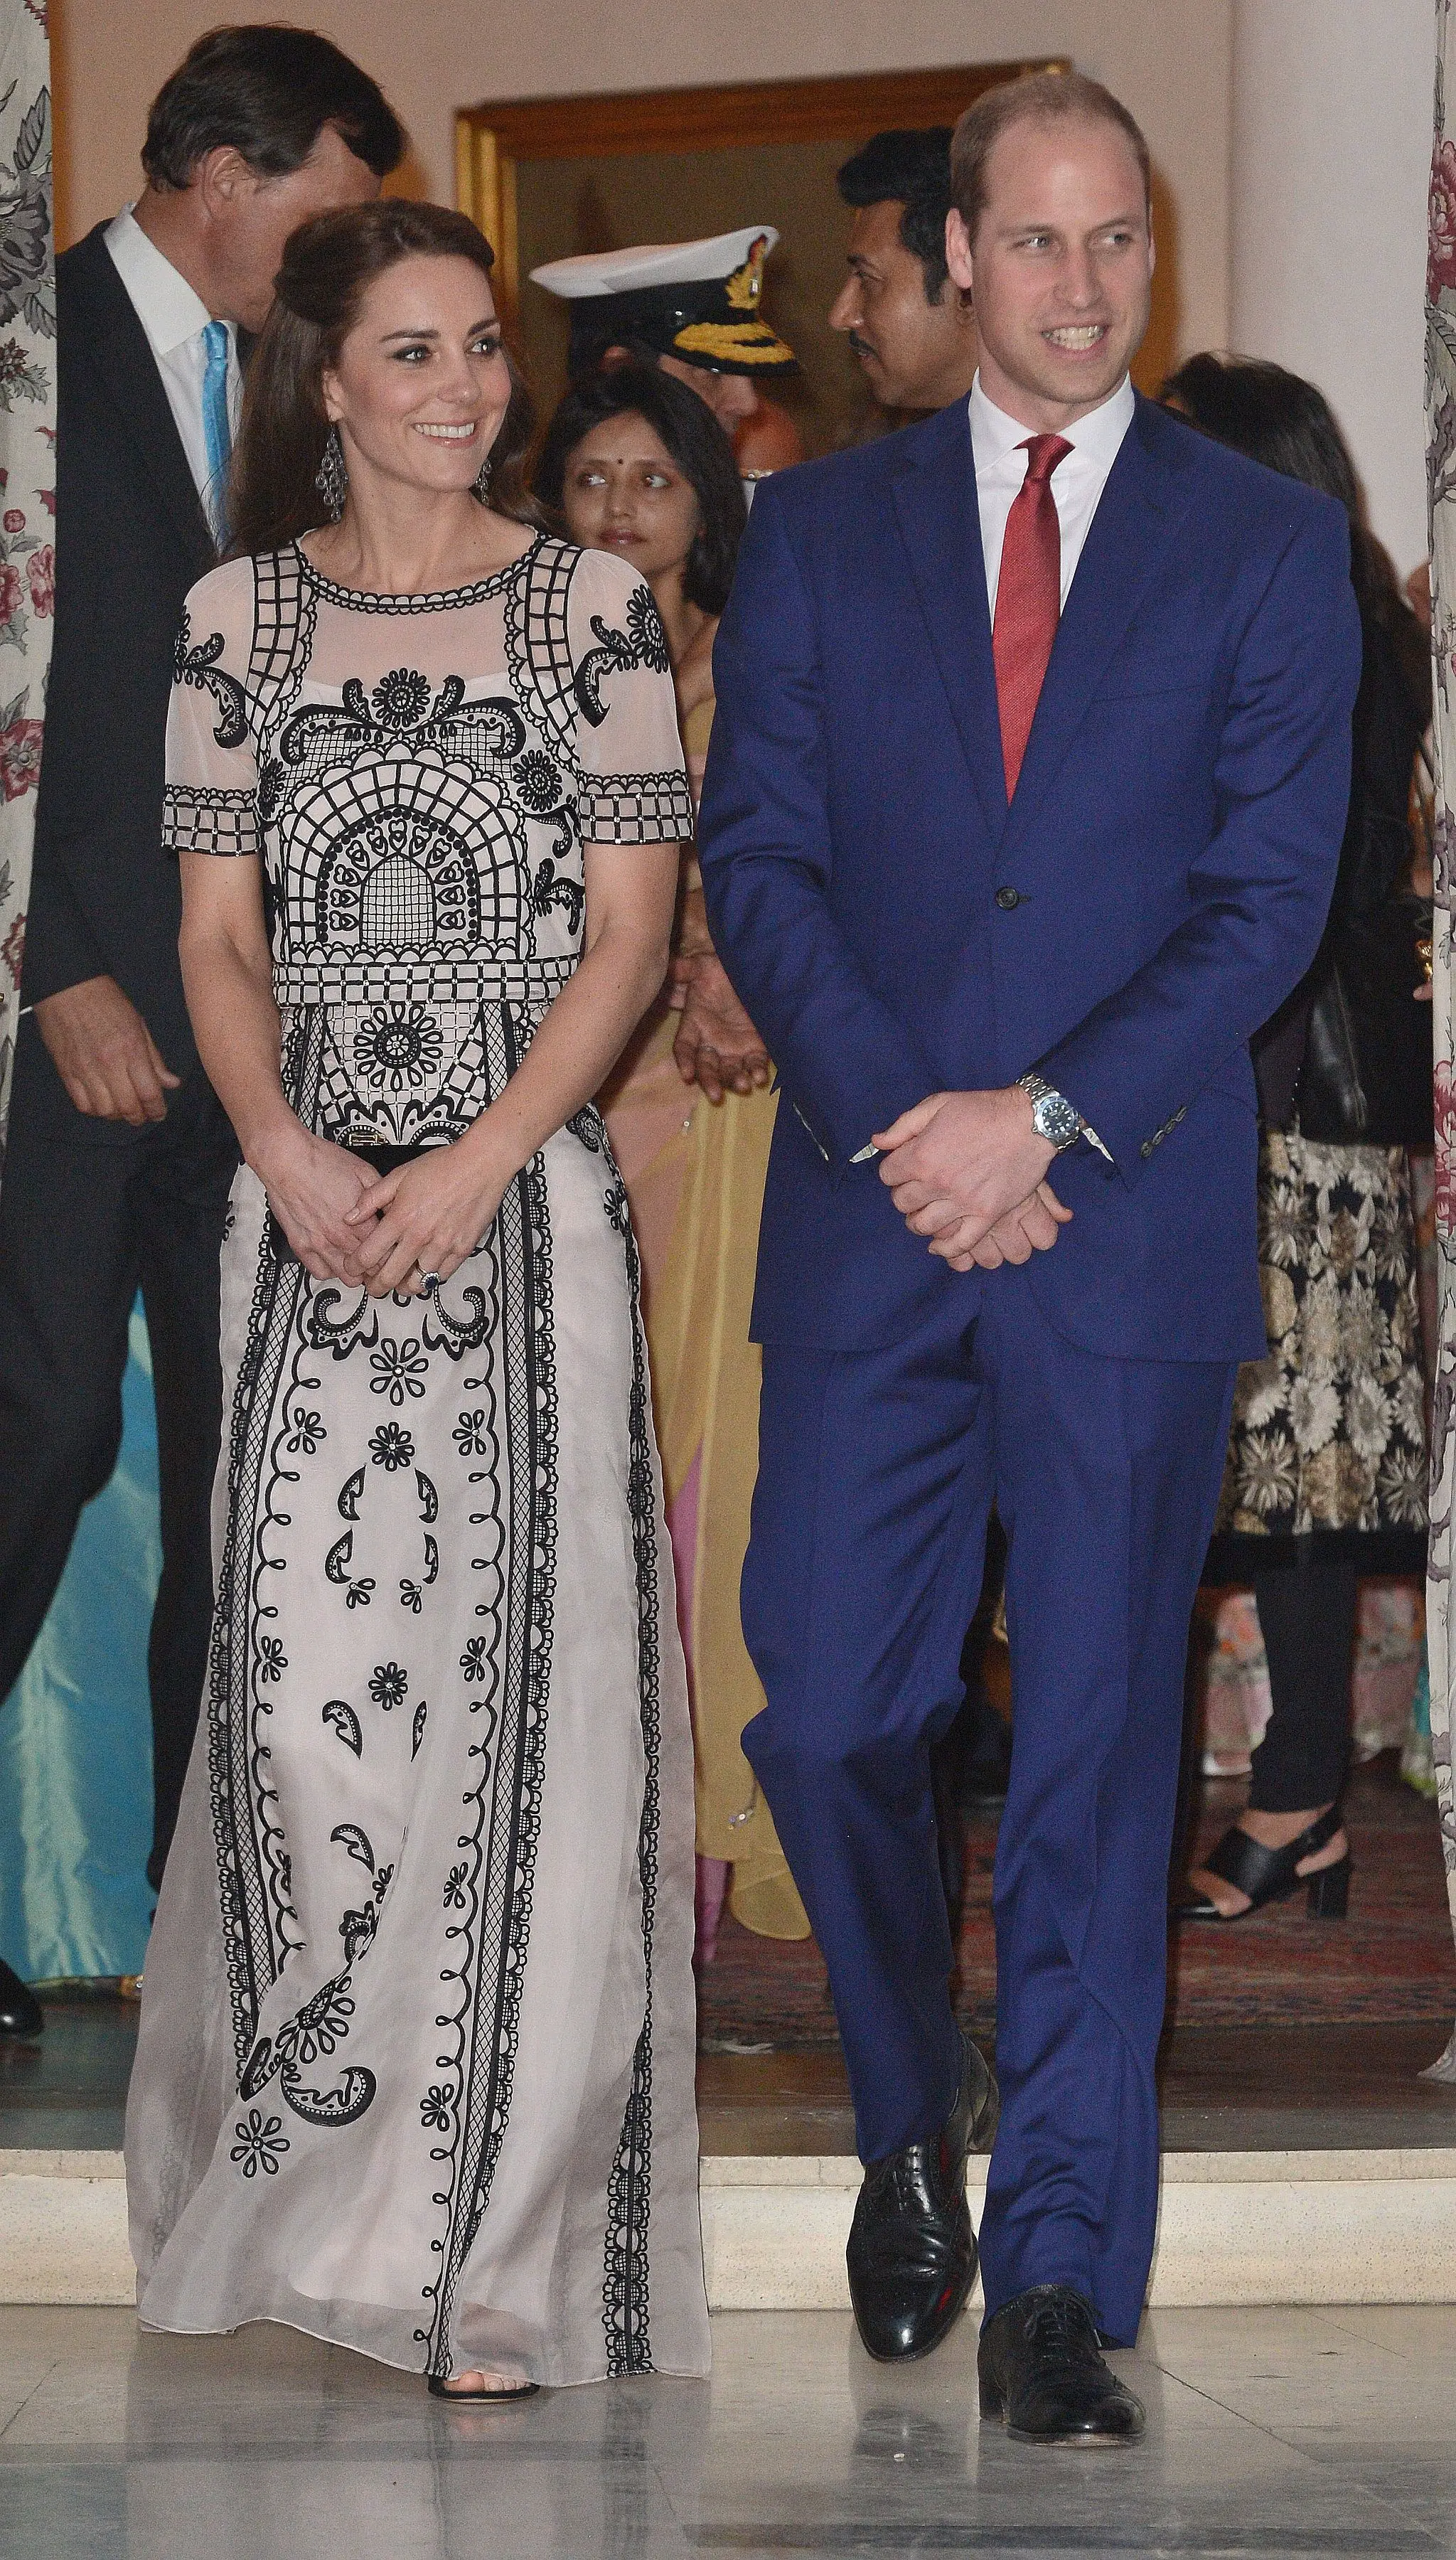 The Duke and Duchess of Cambridge in India durign garden party Catherine wearing Temperley London Delphia Top and Skirt